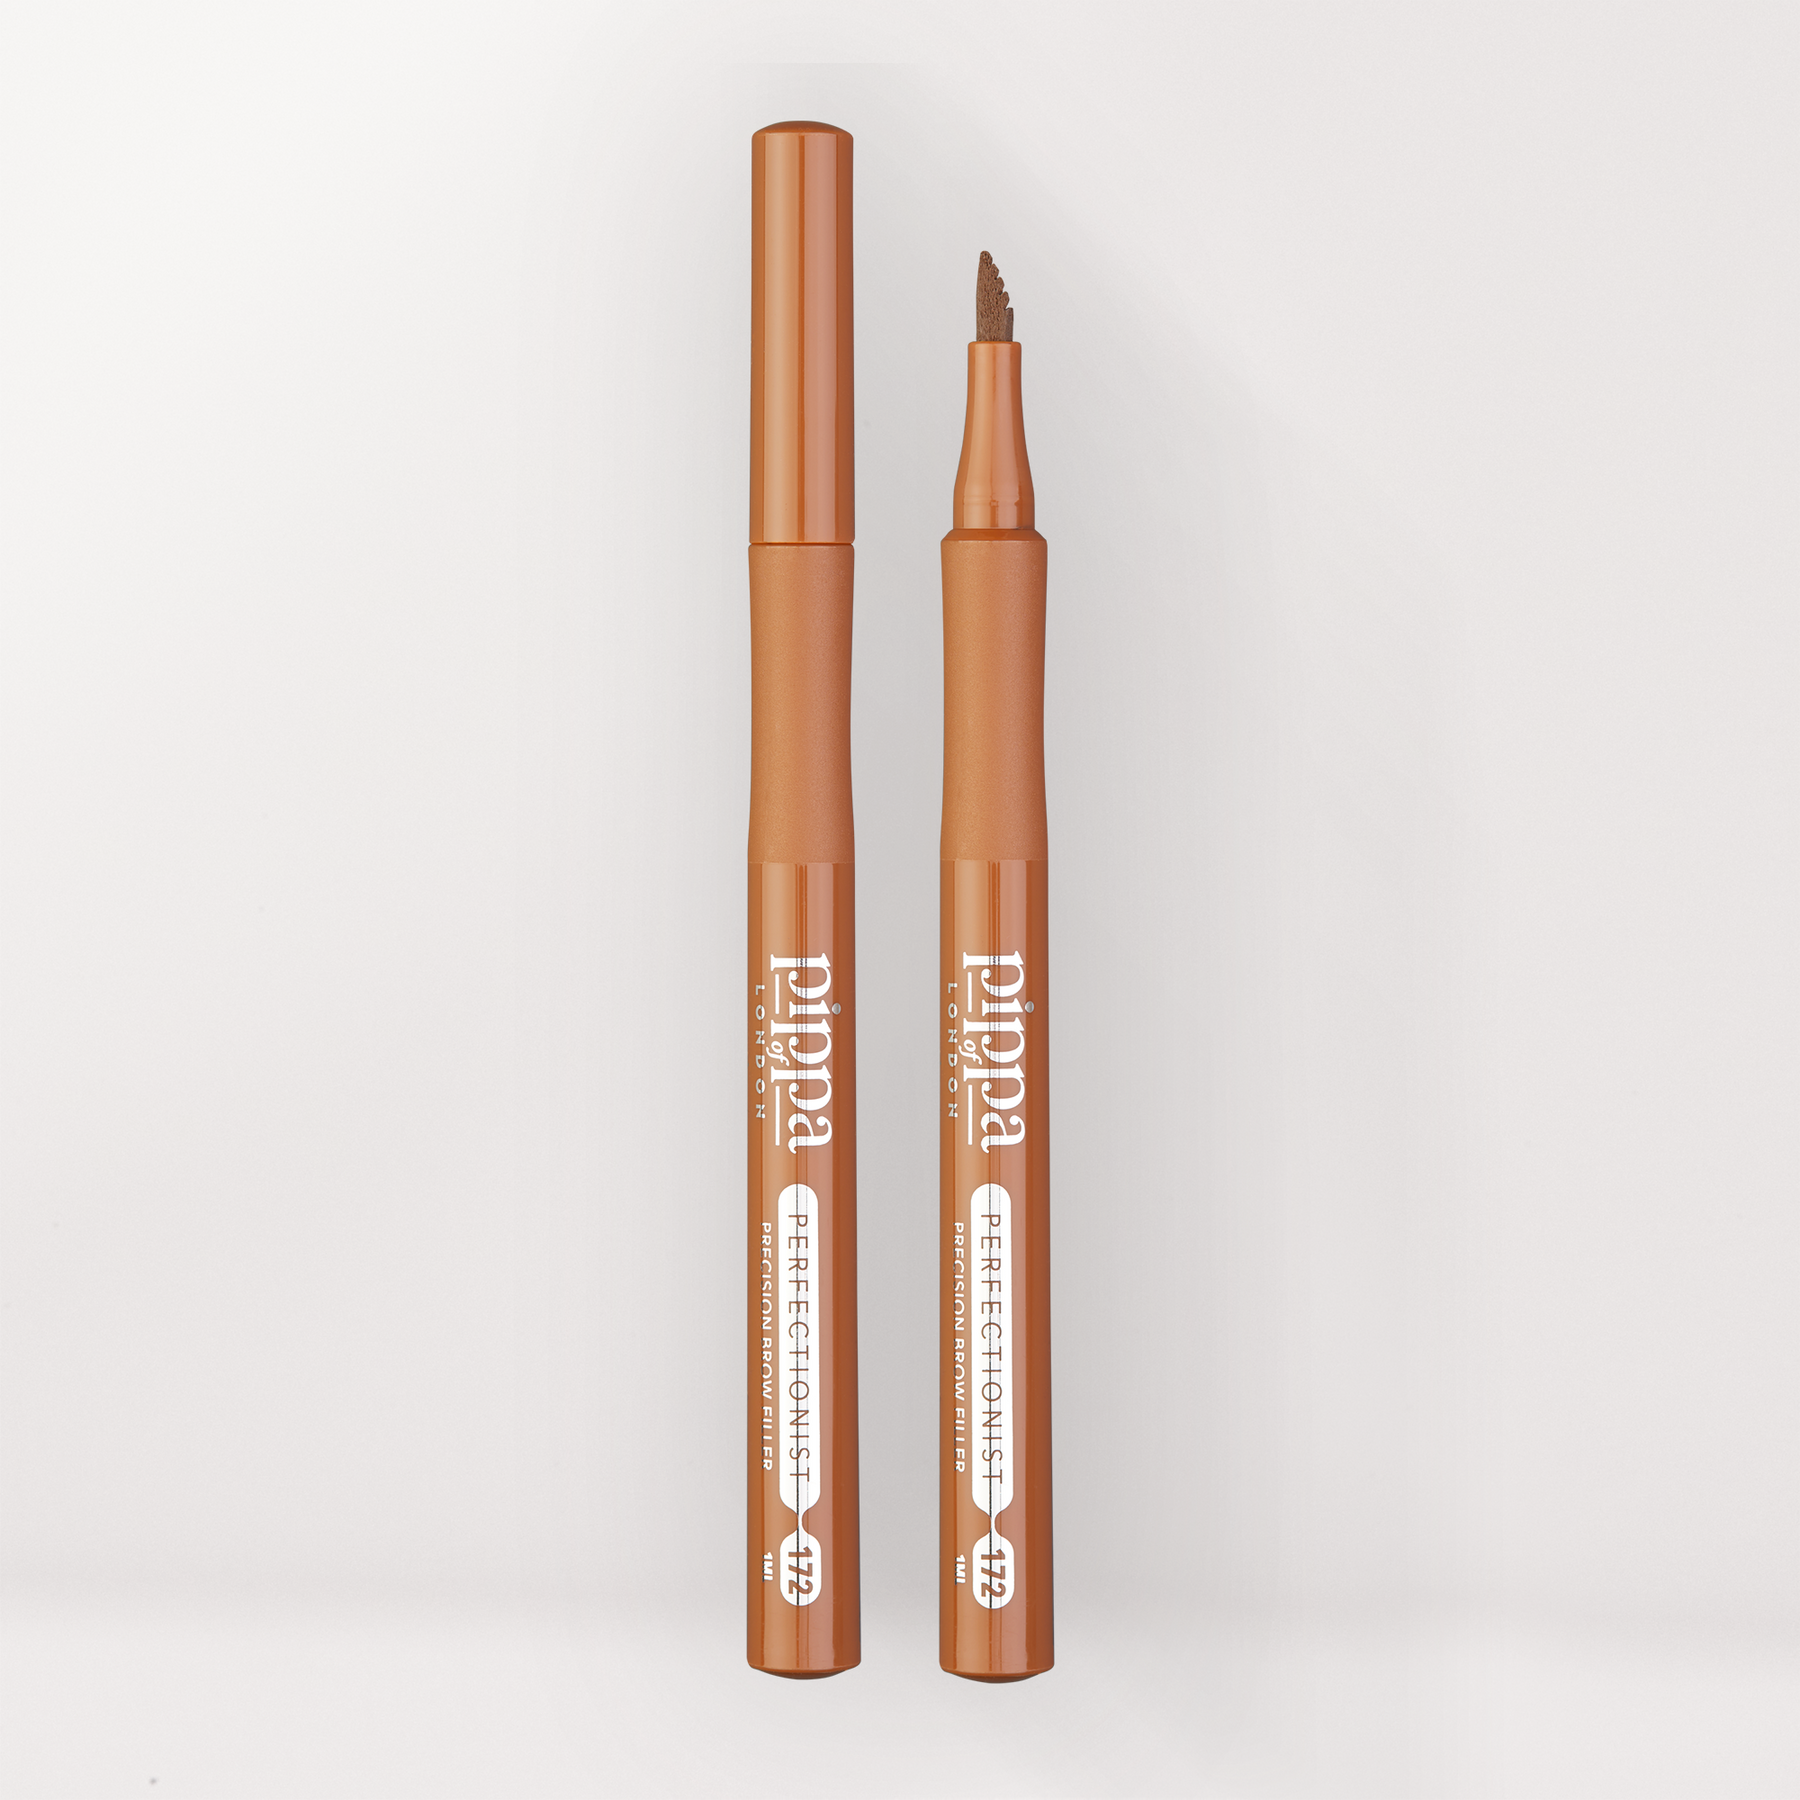 Perfectionist Brow Ultra-Fine Pen